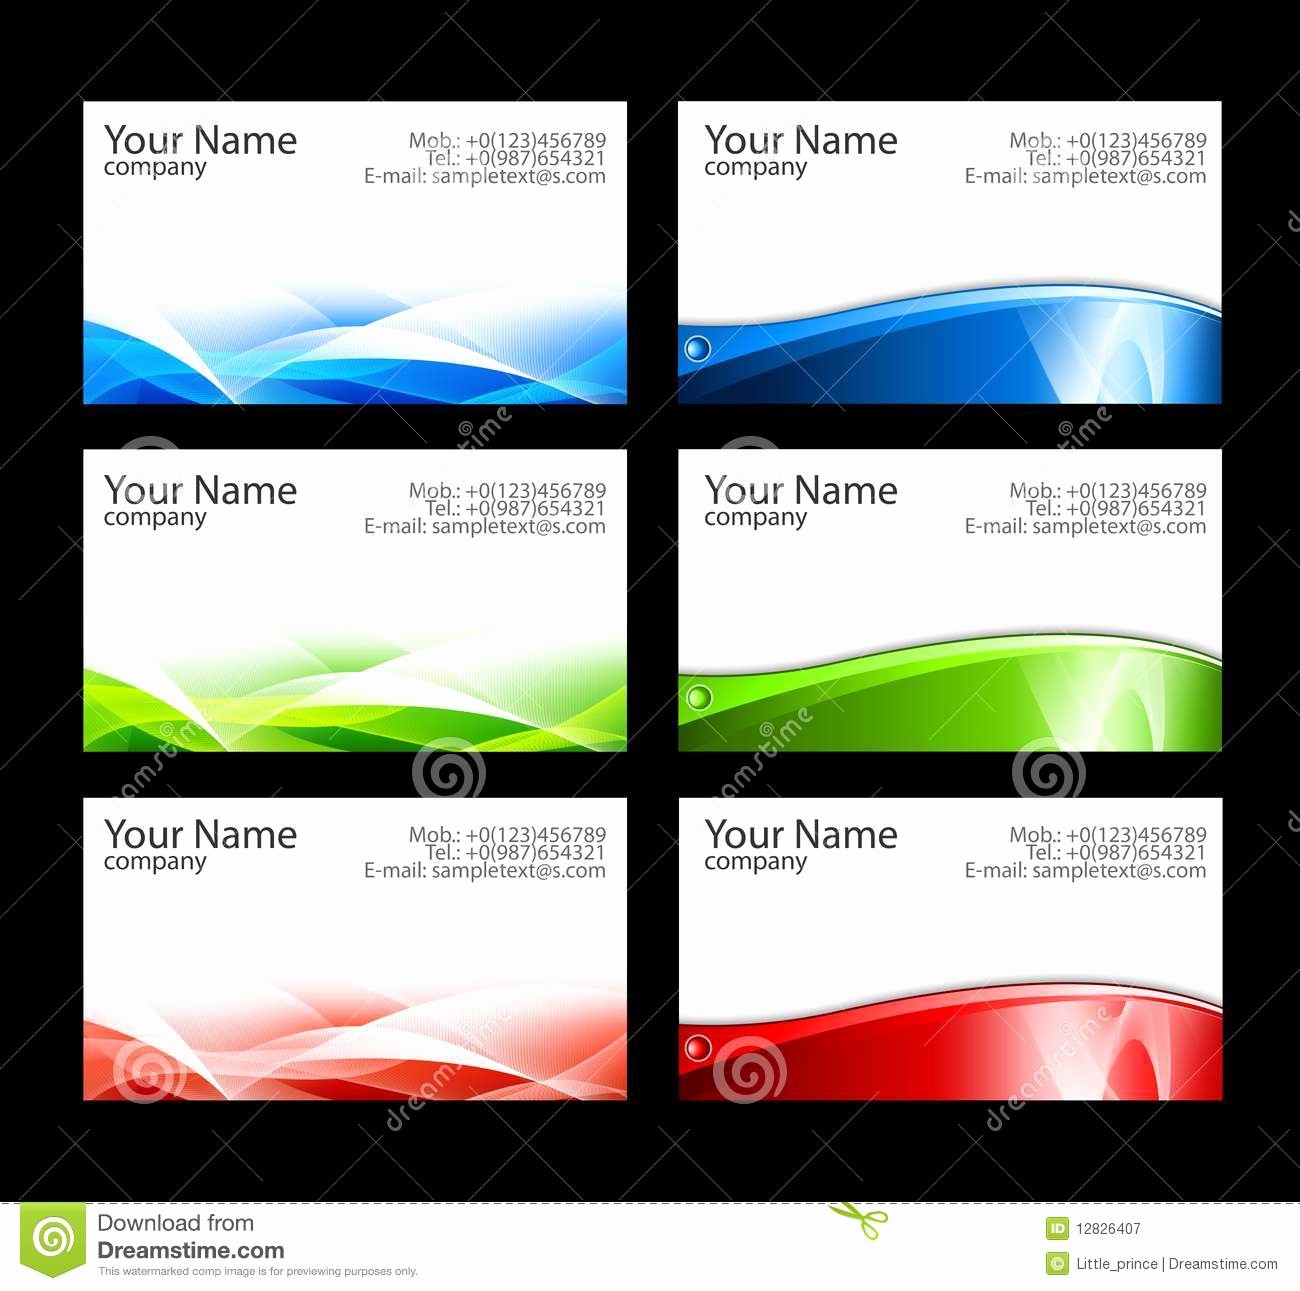 Business Cards Samples Free Download Elegant Calling Card Template Free Download Beautiful Template